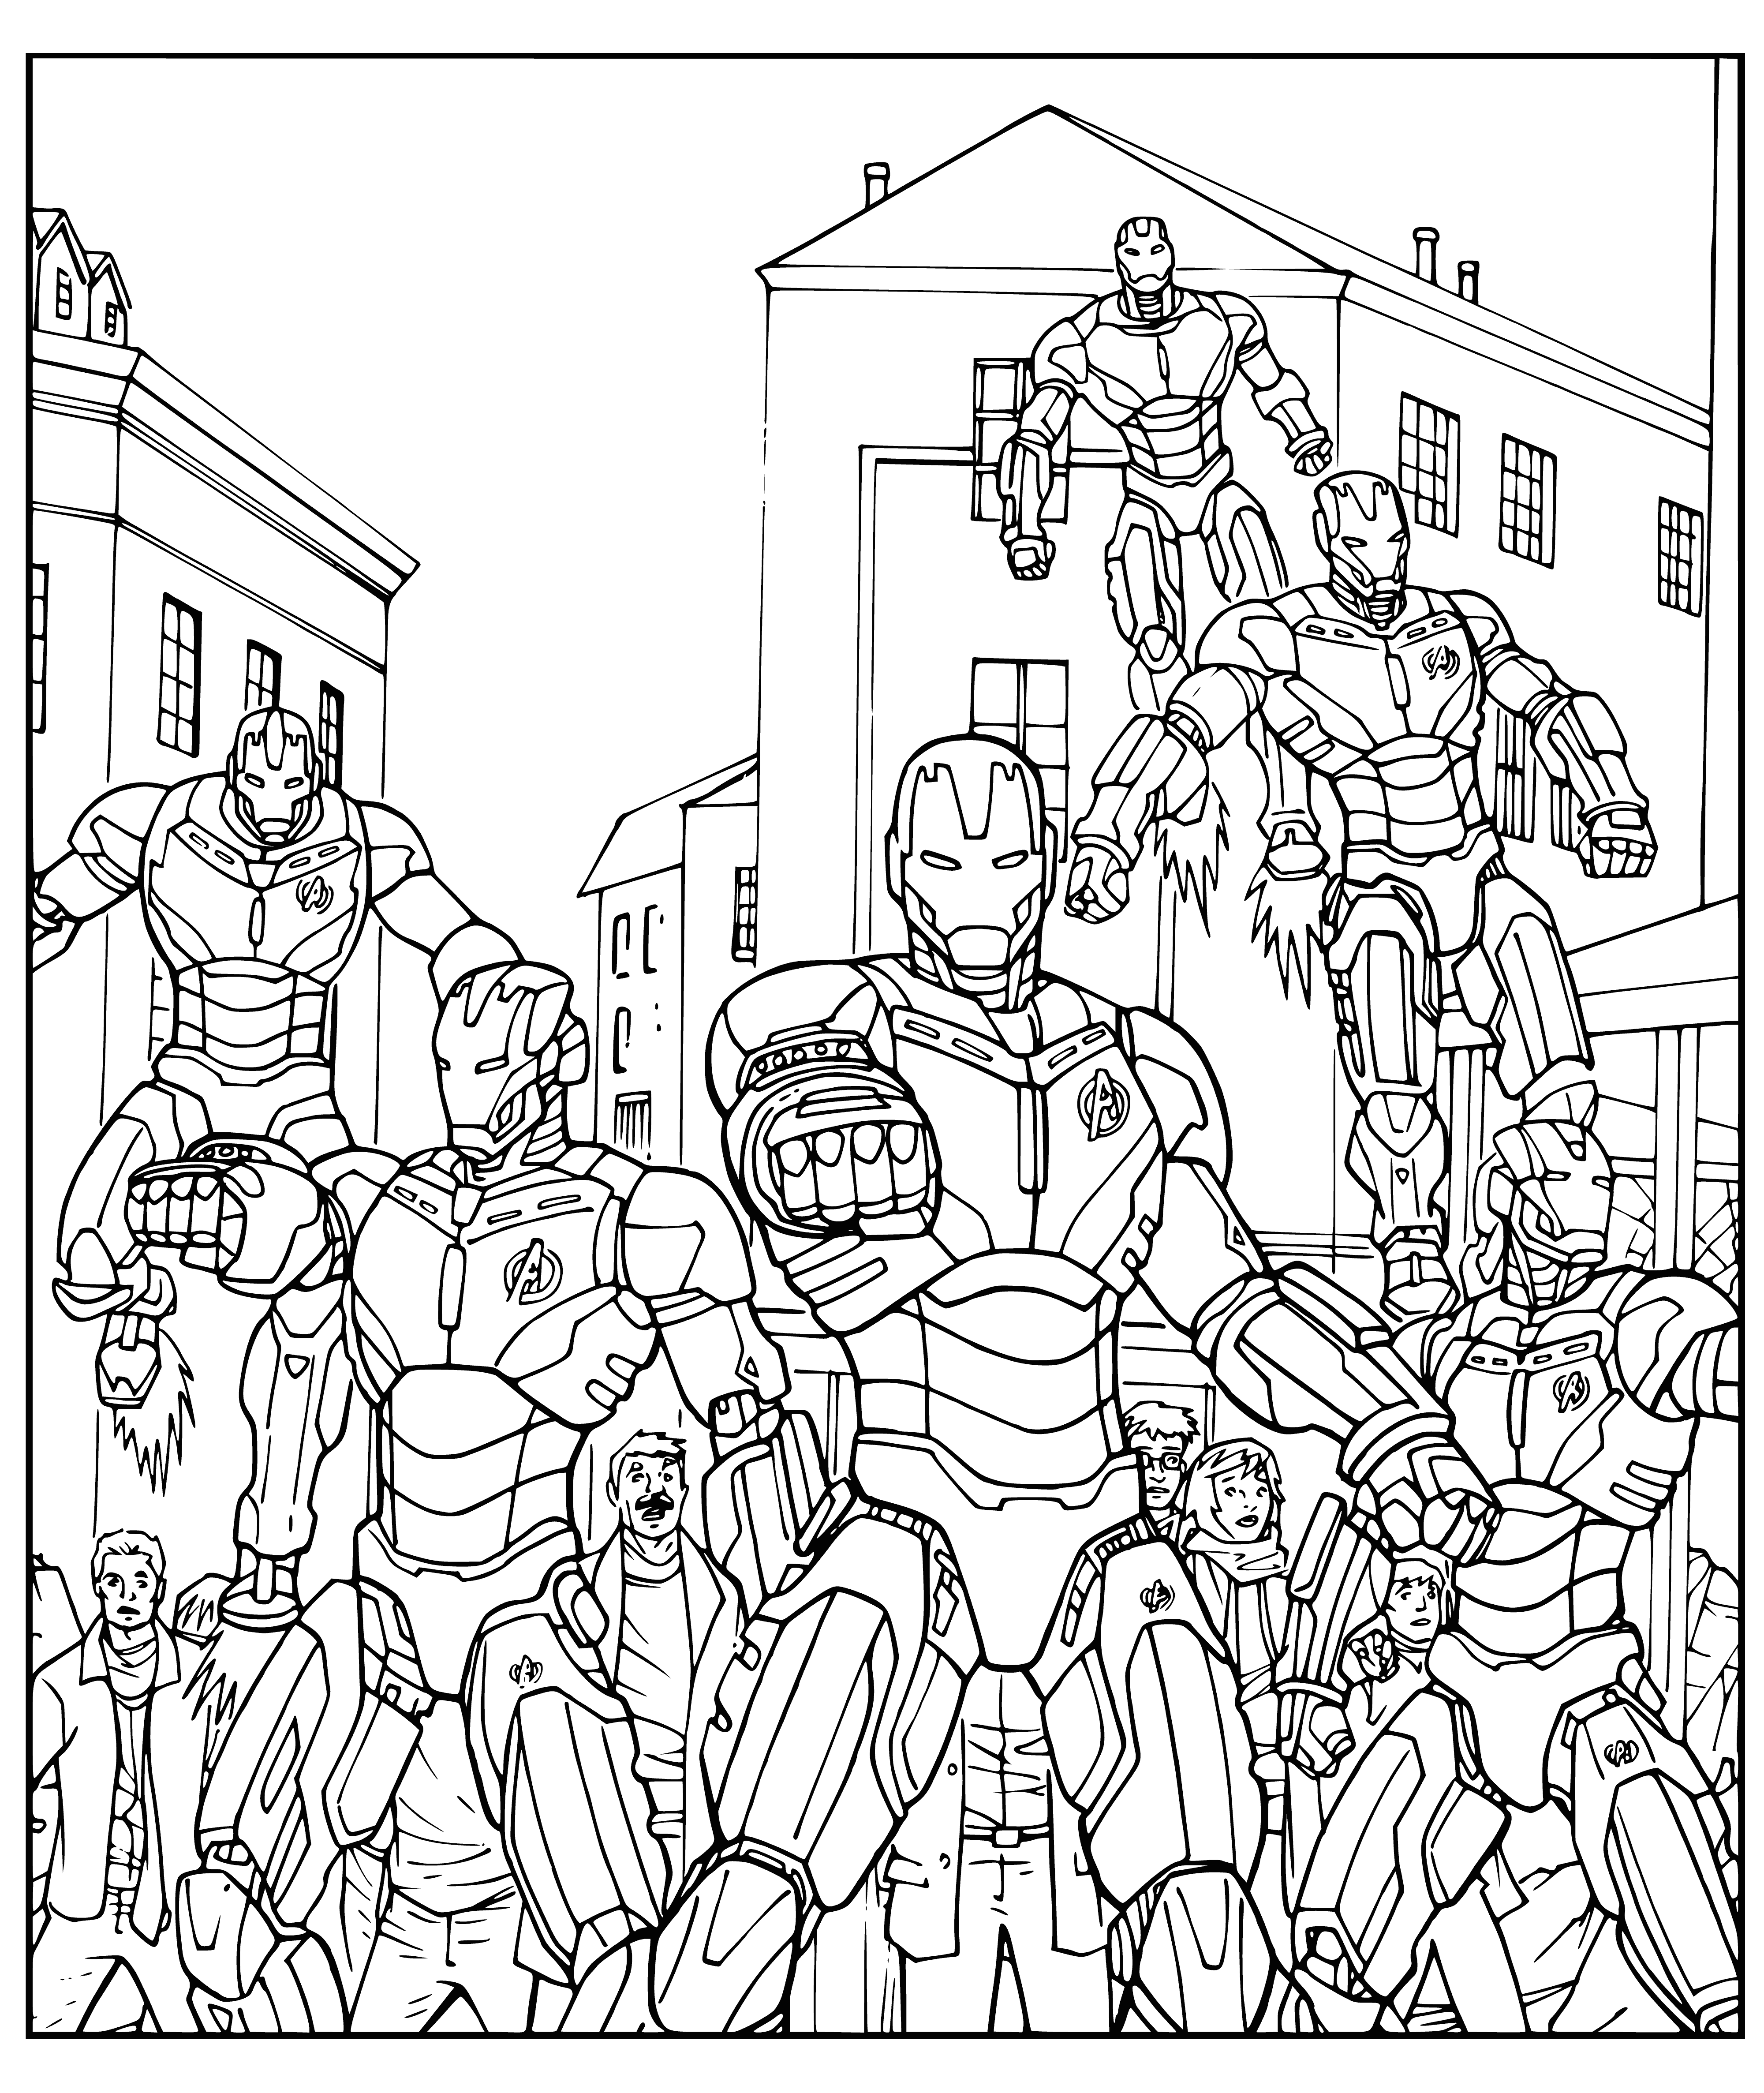 Ultron's Robot Army coloring page